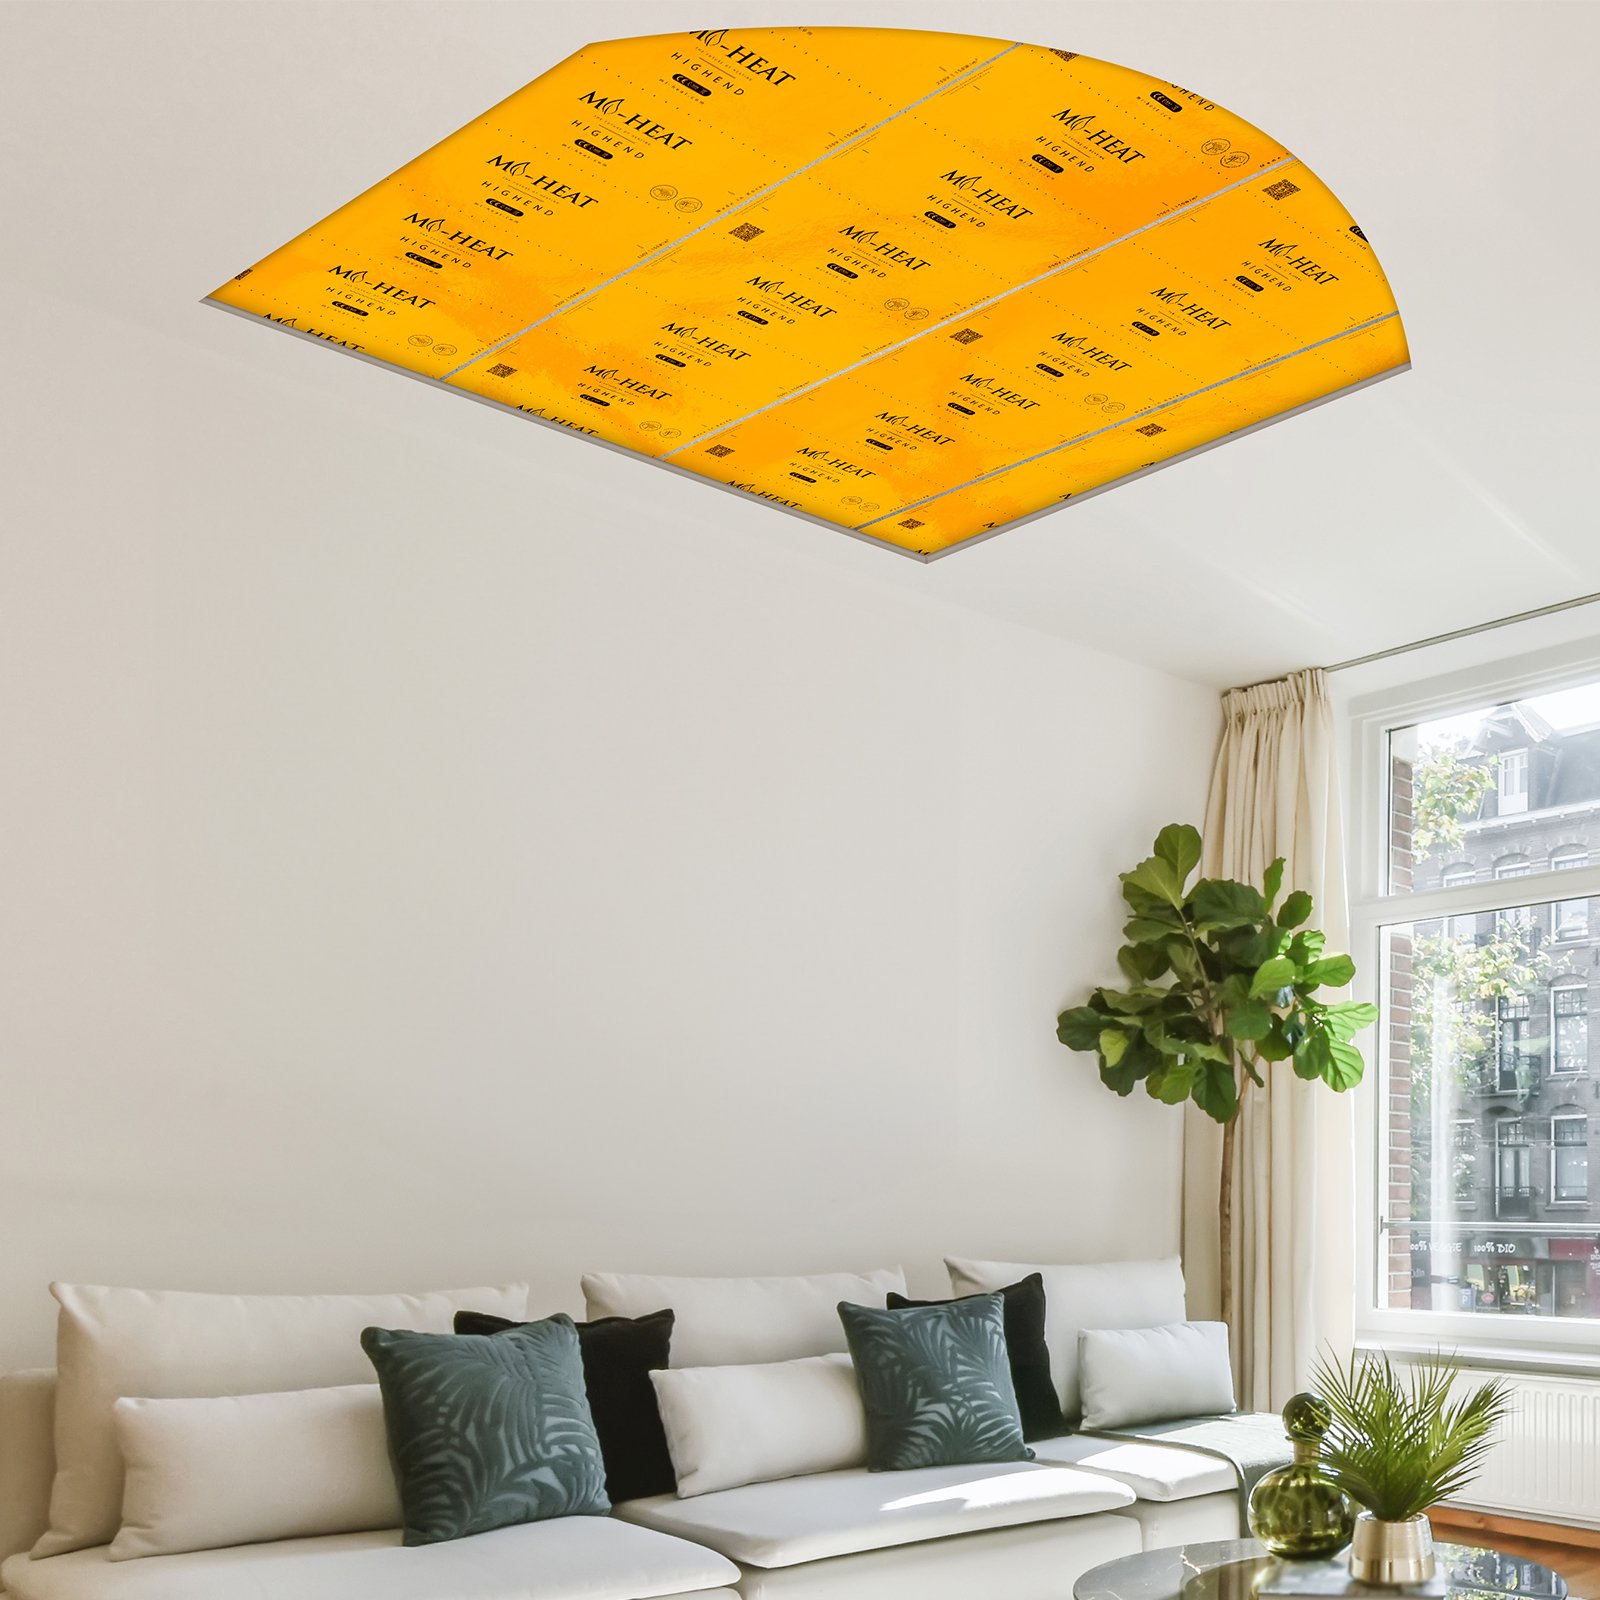 Ceiling heaters provide a comfortable warmth and a pleasant indoor climate